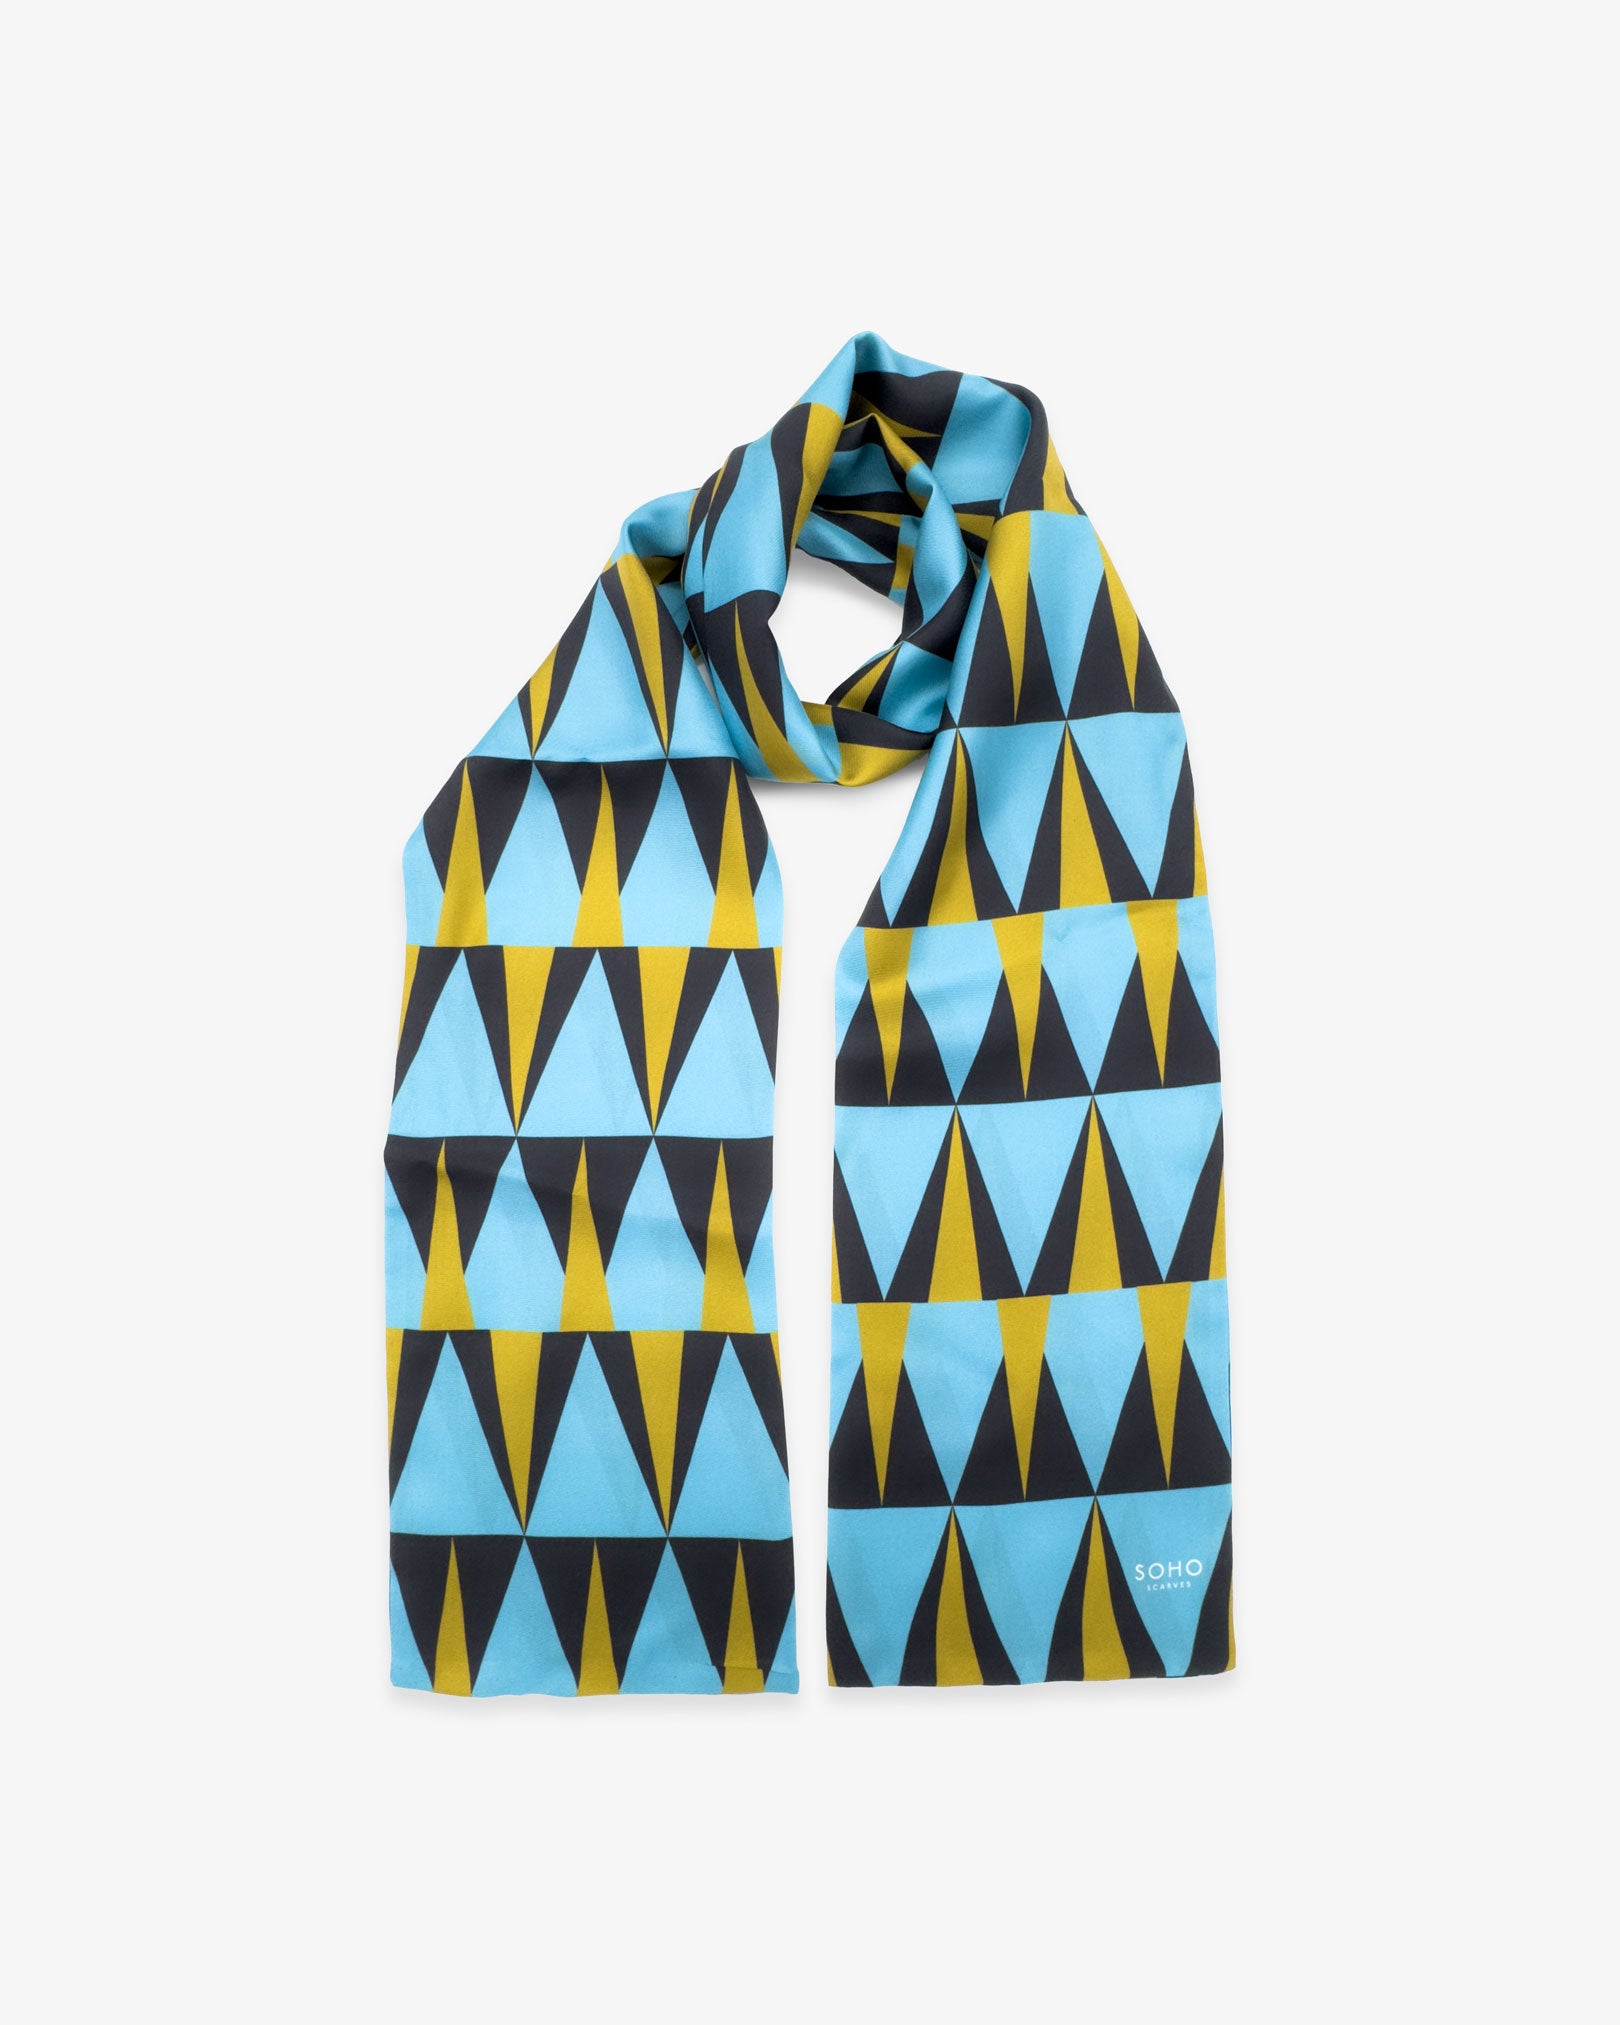 The 'Leipzig' Bauhaus-inspired silk scarf looped with both ends parallel to effectively display the full repeat pattern of pale blue, charcoal grey and yellow triangles.